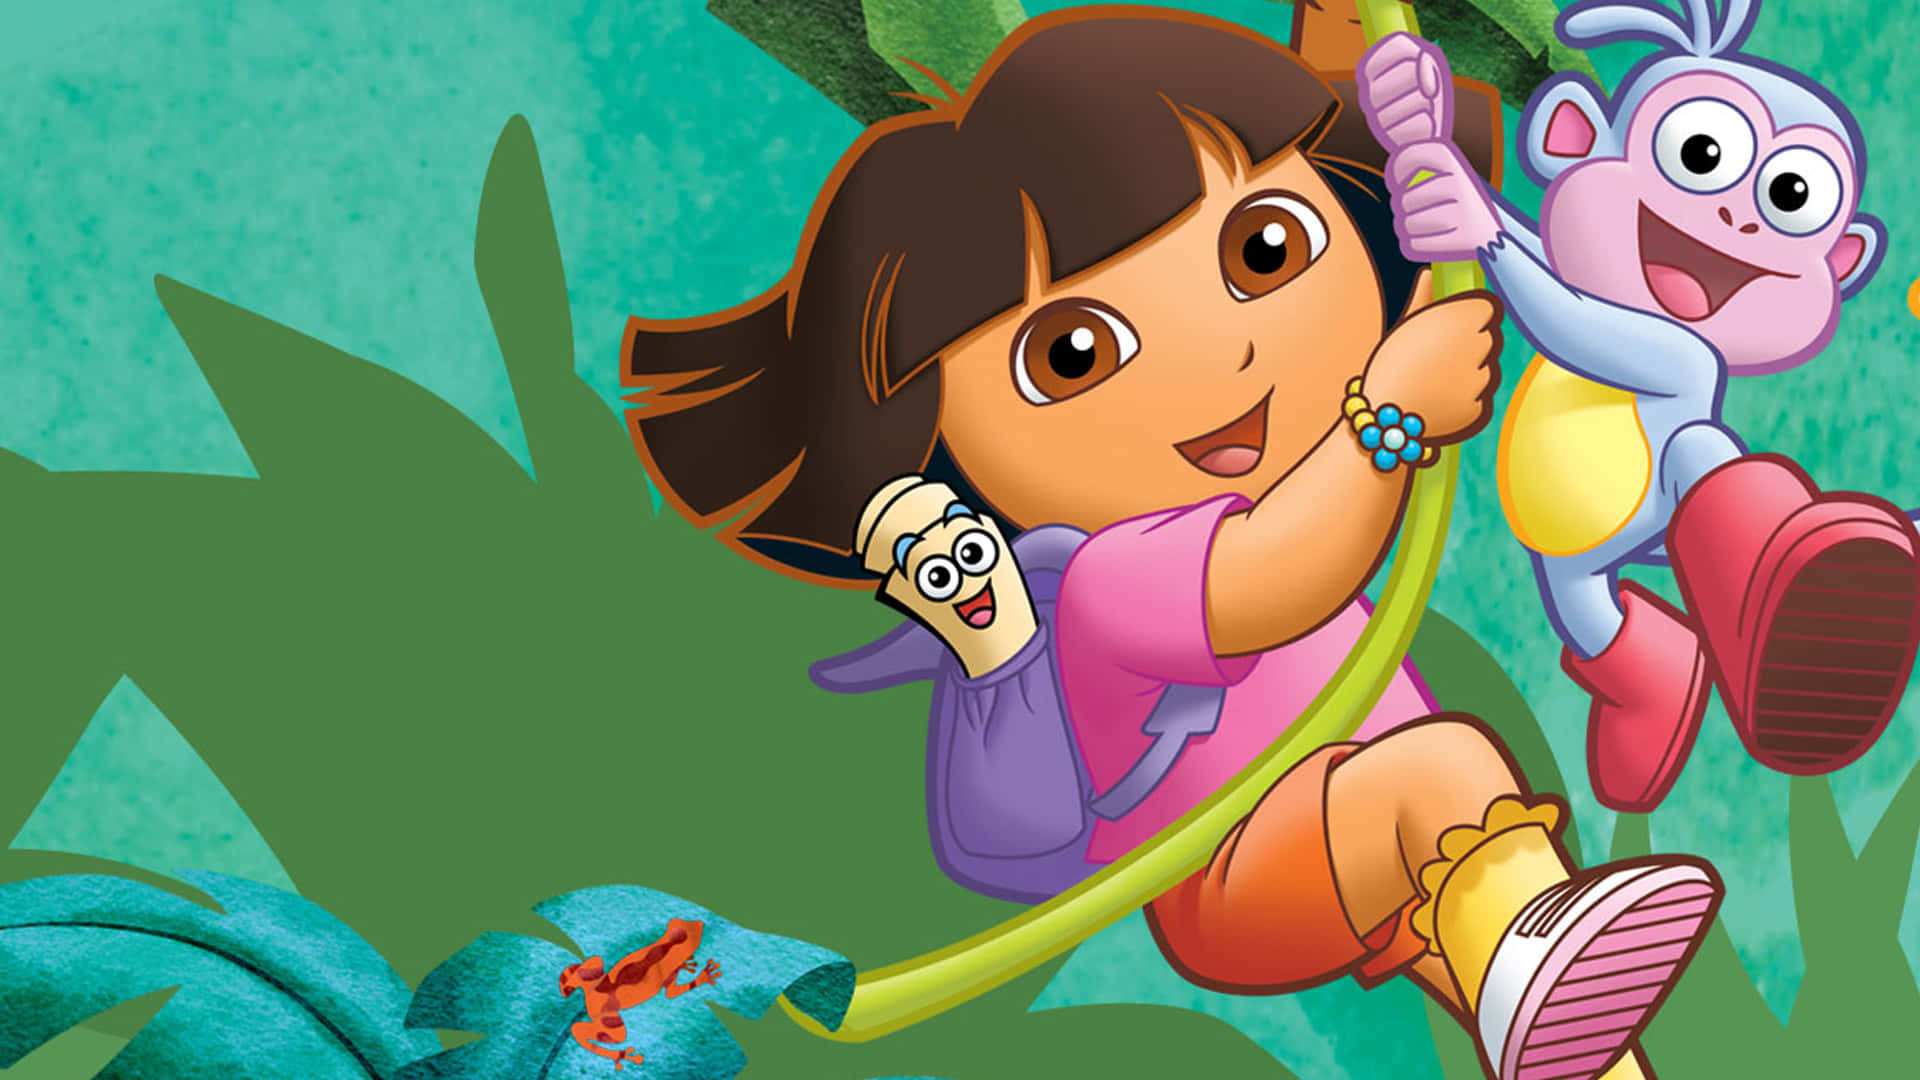 Exploring the world with Dora: